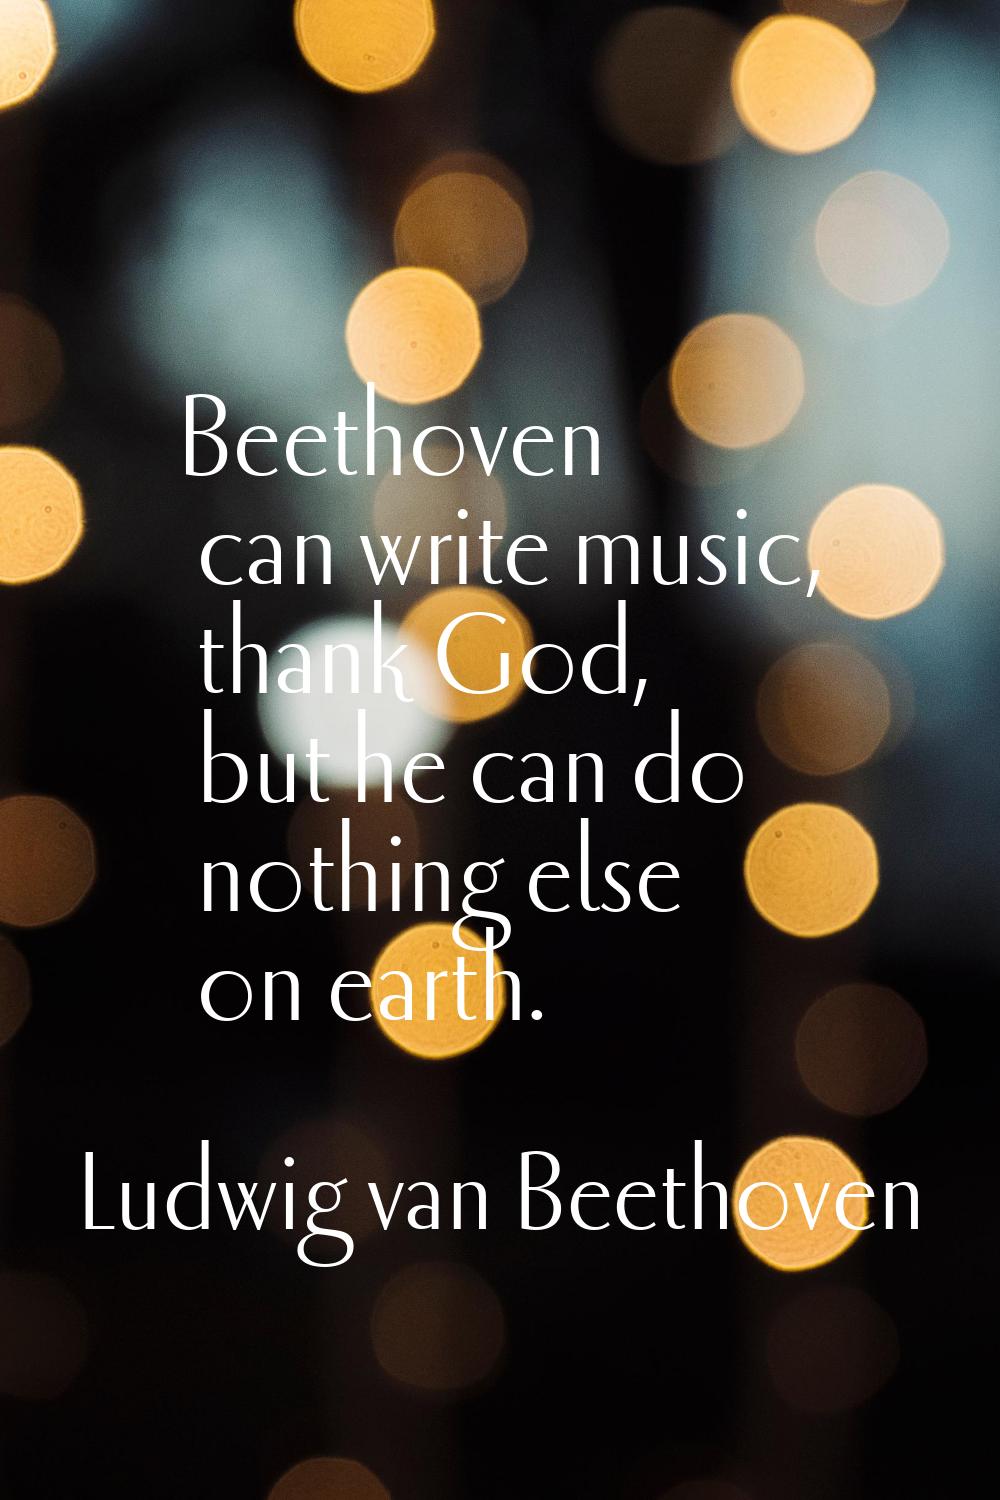 Beethoven can write music, thank God, but he can do nothing else on earth.